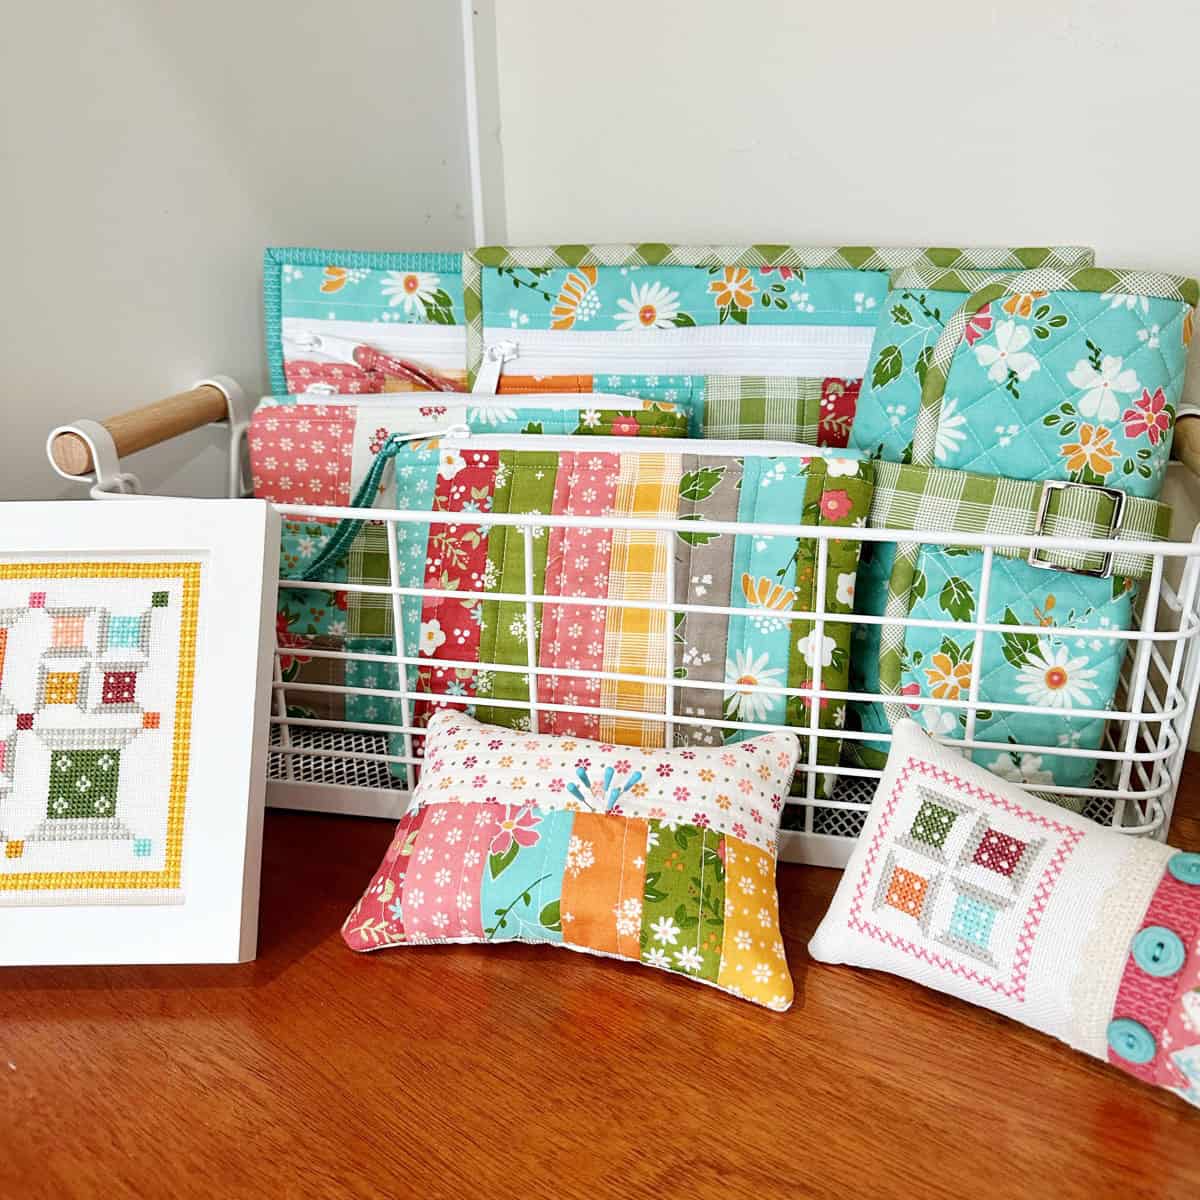 Simple Pincushion Tutorial + Free Pattern featured by Top US Quilt Blog, A Quilting Life